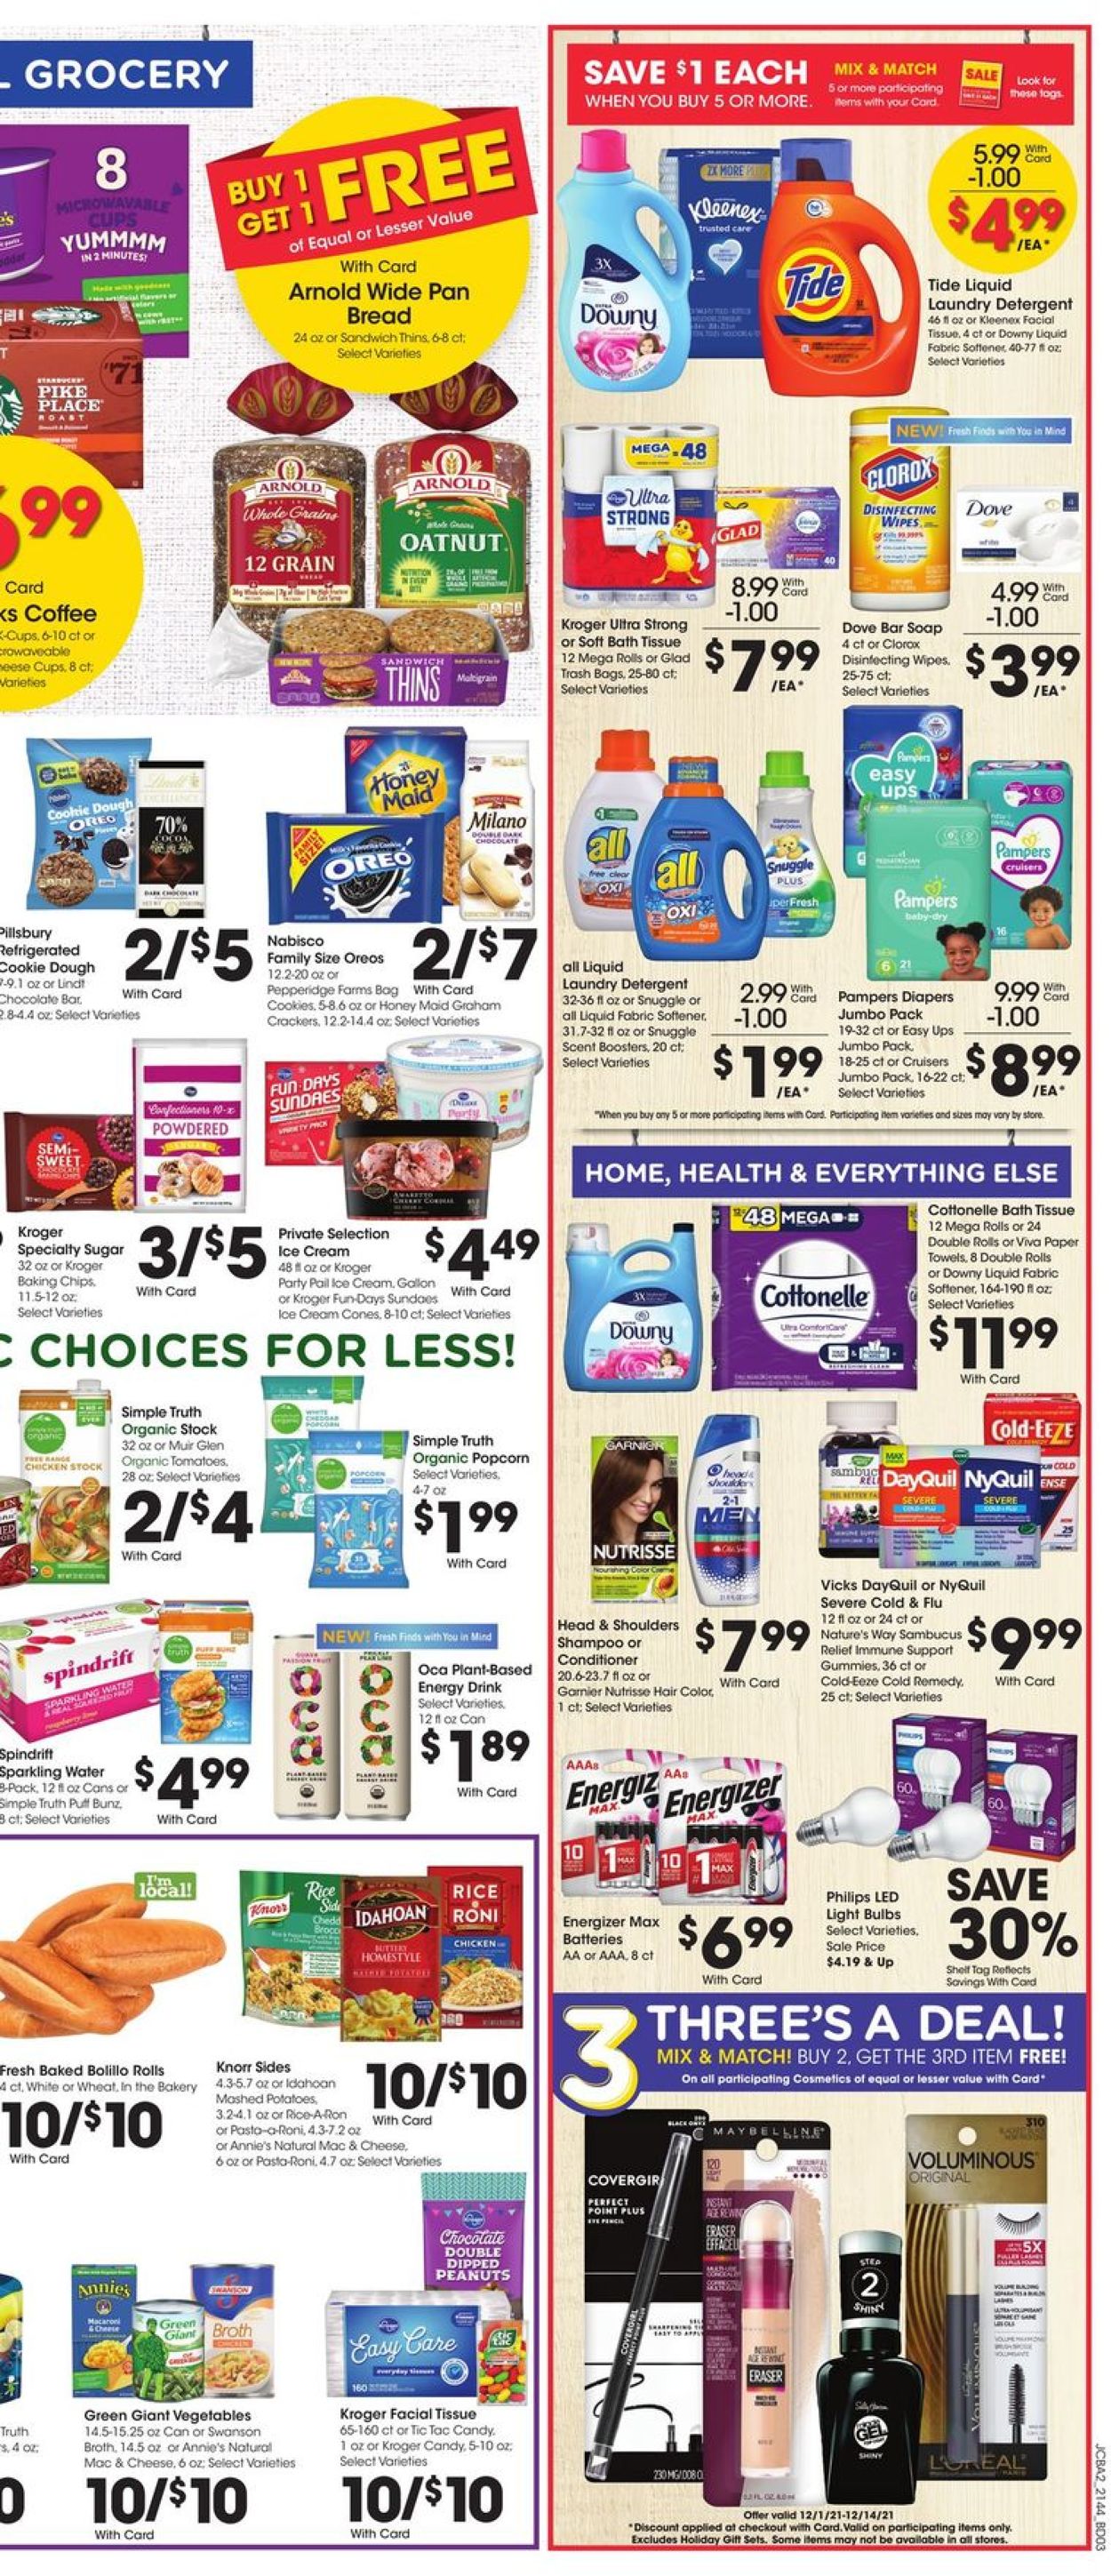 Catalogue Jay C Food Stores from 12/01/2021